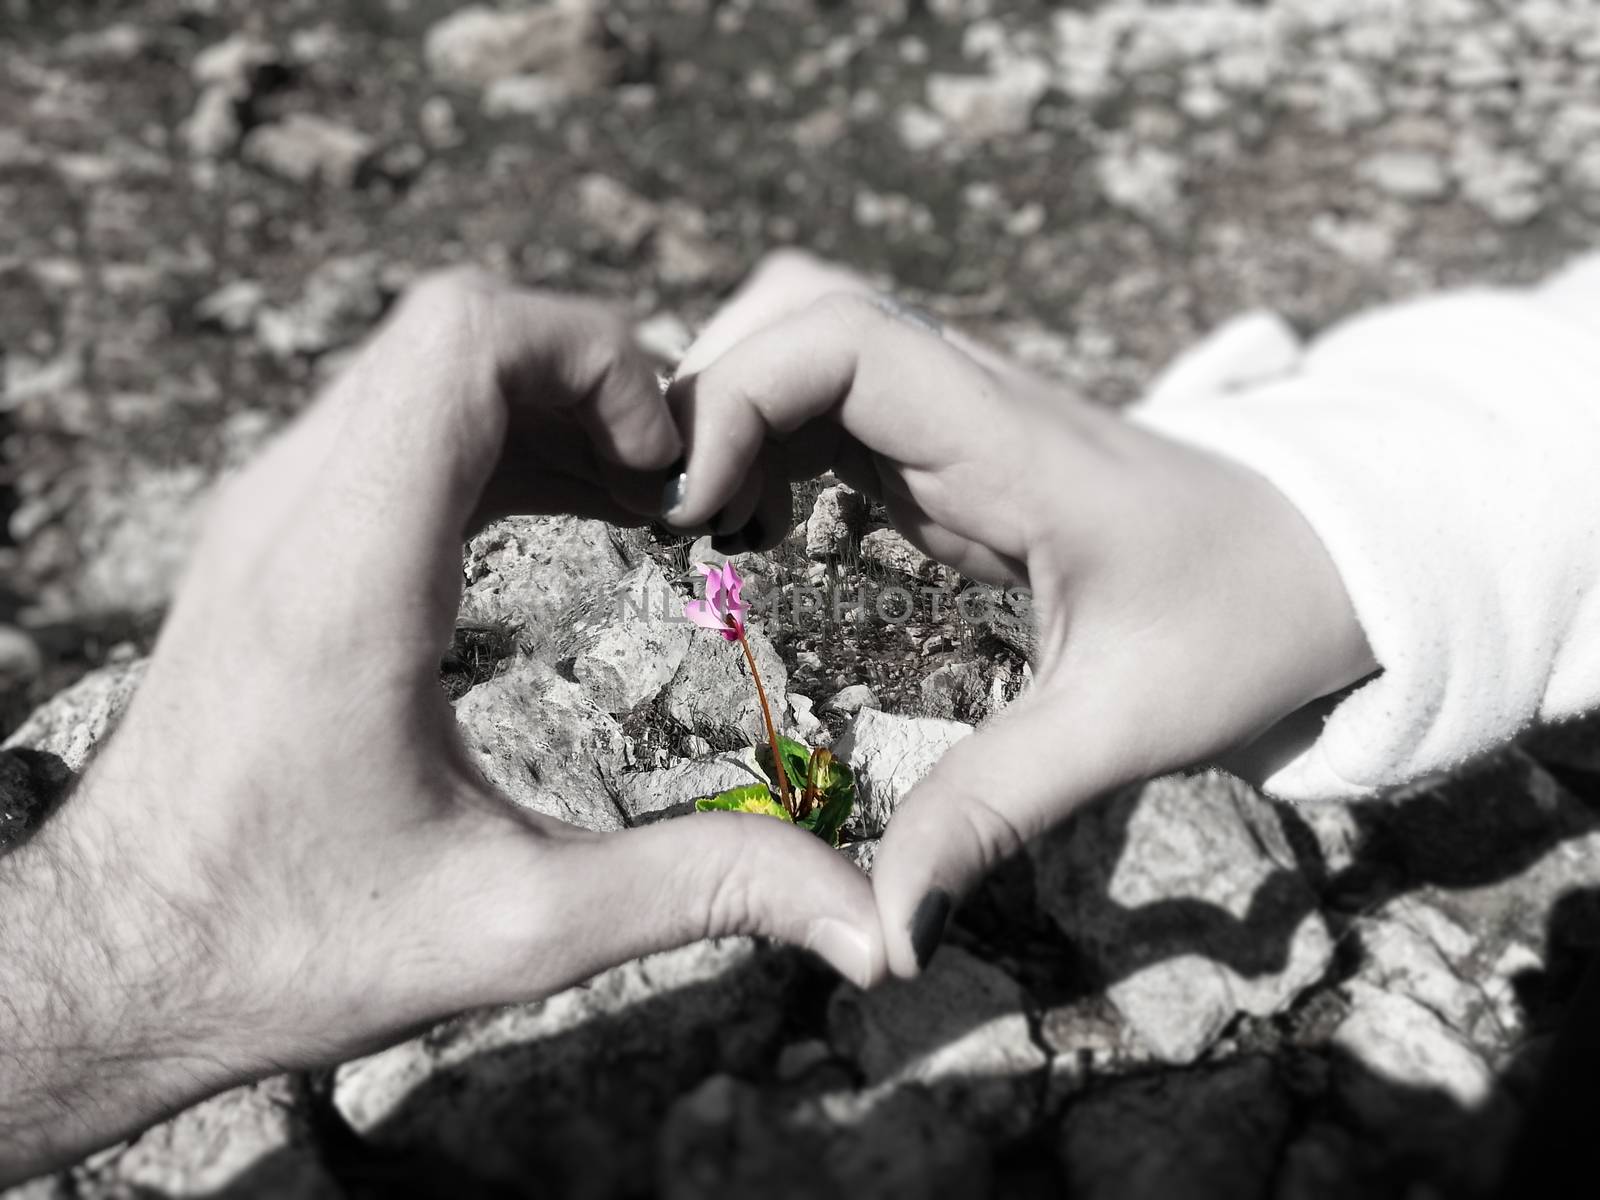 Two hands that create heart shape. In the heart there is a pink cyclamen that lies within rocks. Black and white background.